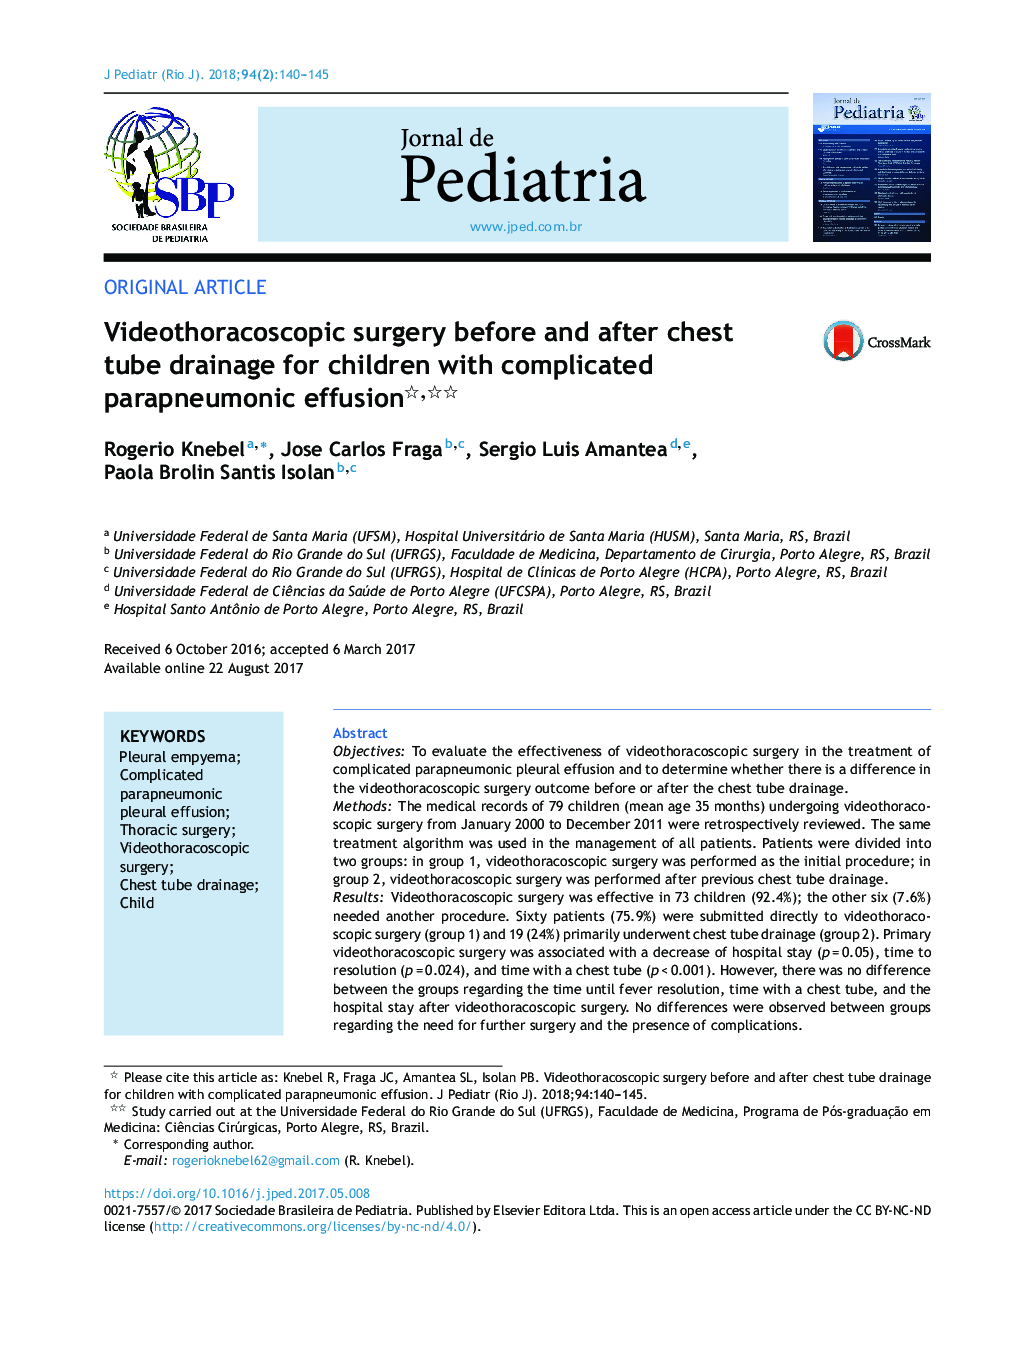 Videothoracoscopic surgery before and after chest tube drainage for children with complicated parapneumonic effusion